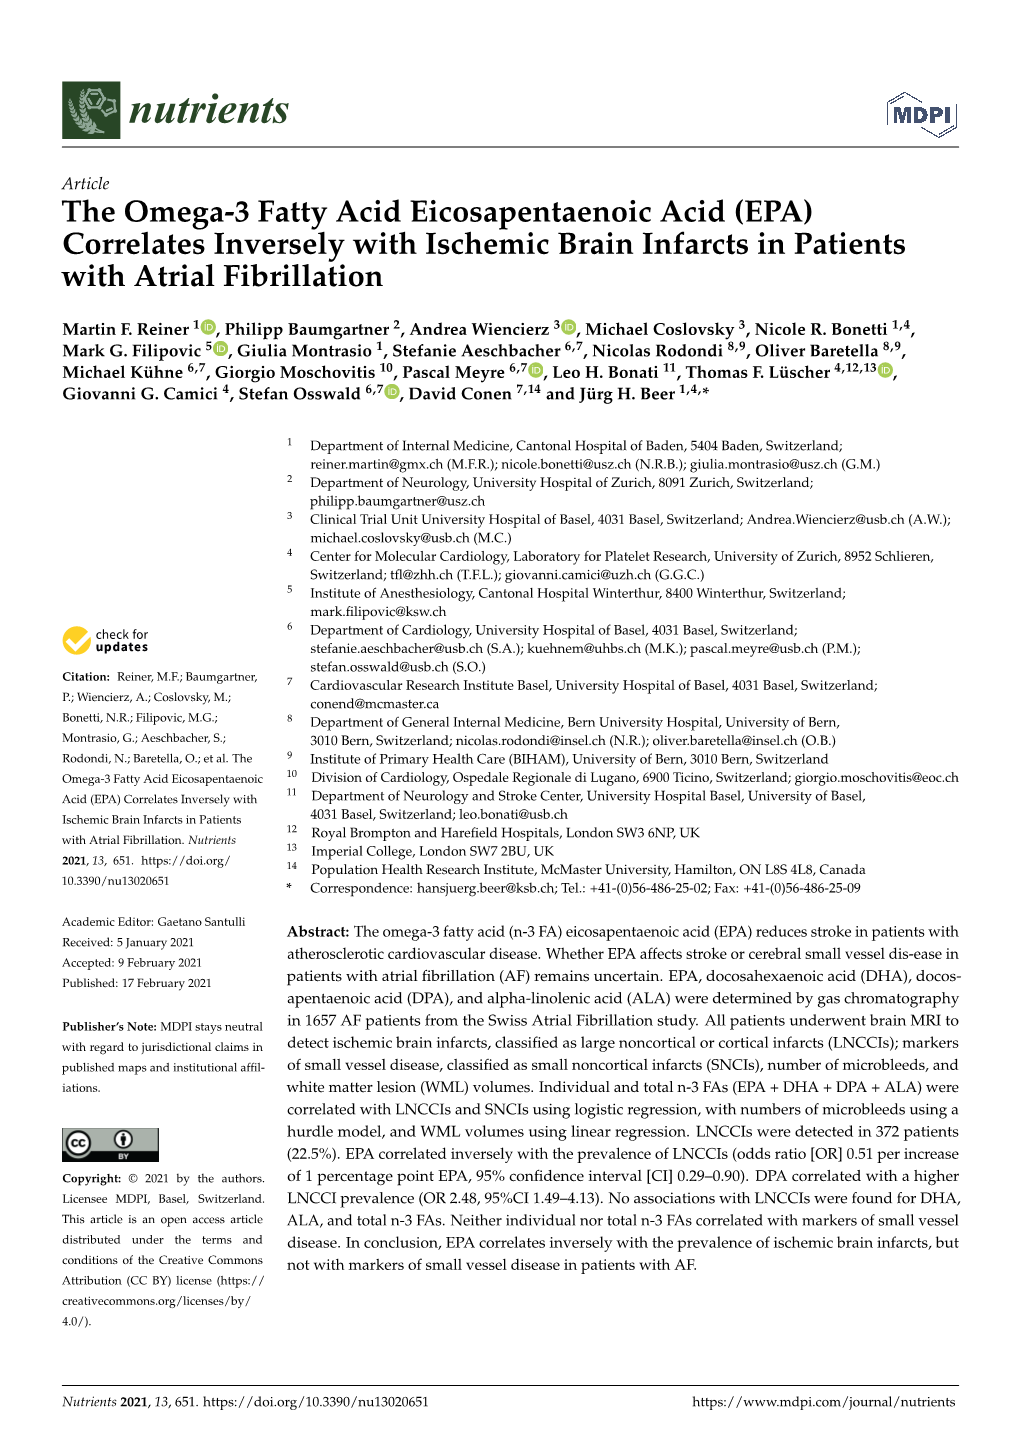 The Omega-3 Fatty Acid Eicosapentaenoic Acid (EPA) Correlates Inversely with Ischemic Brain Infarcts in Patients with Atrial Fibrillation